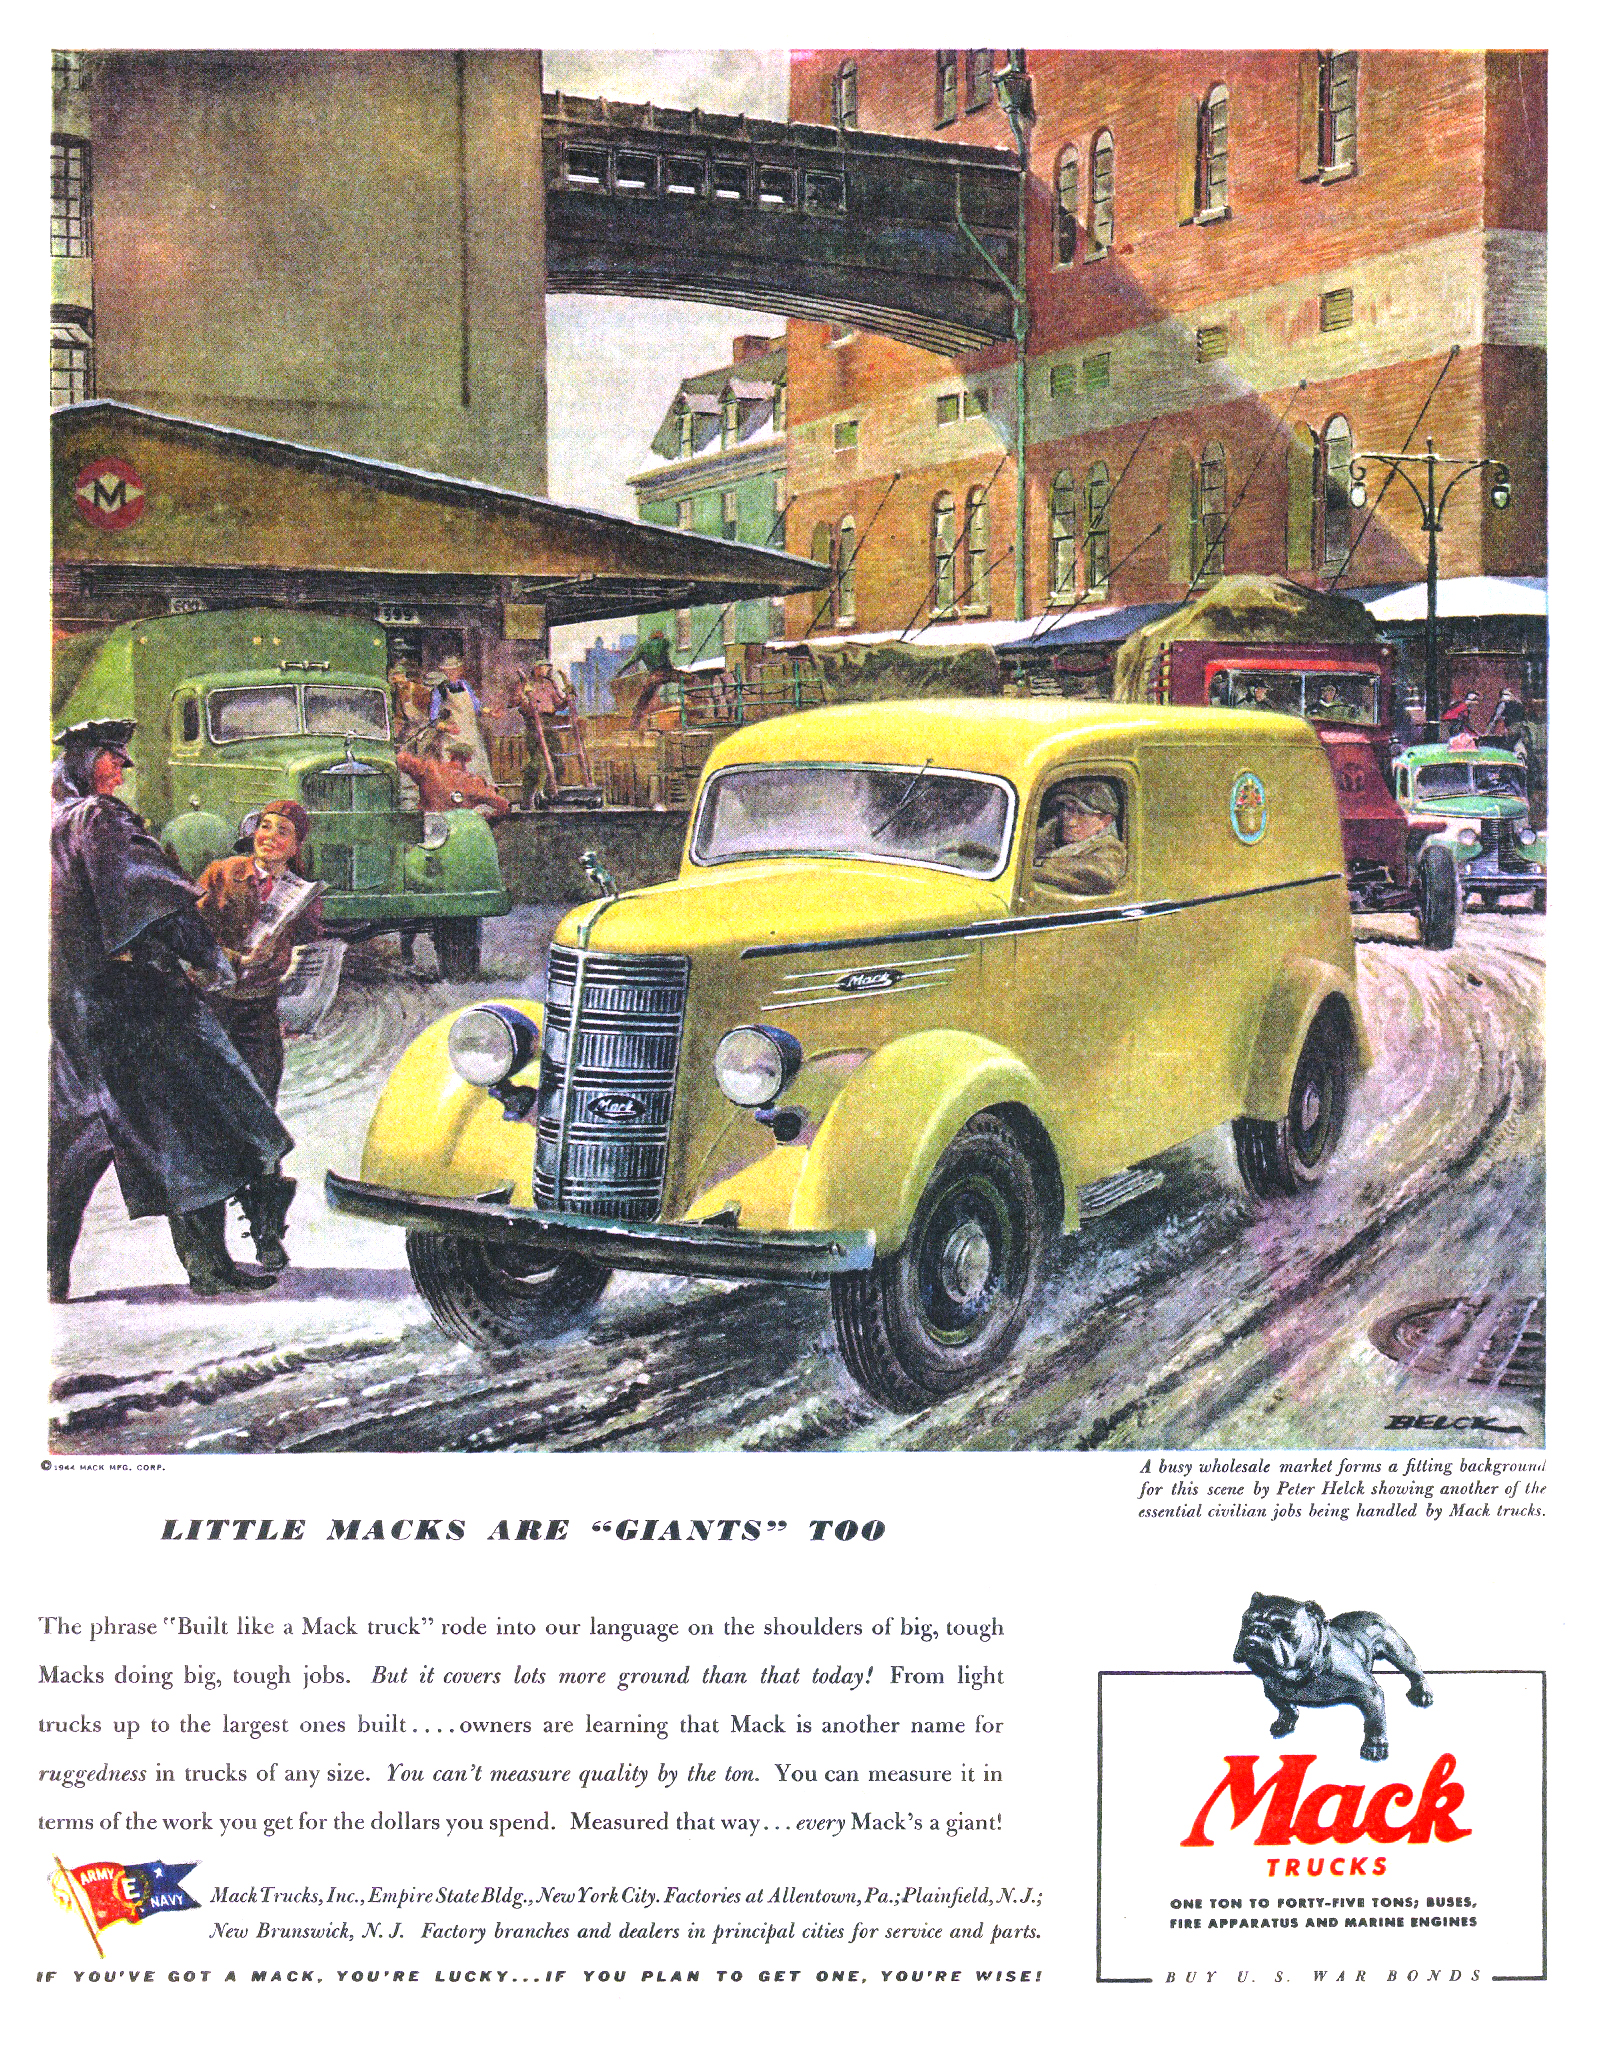 Mack Trucks Ad (1944): Little Macks are "giants" too - Illustrated by Peter Helck